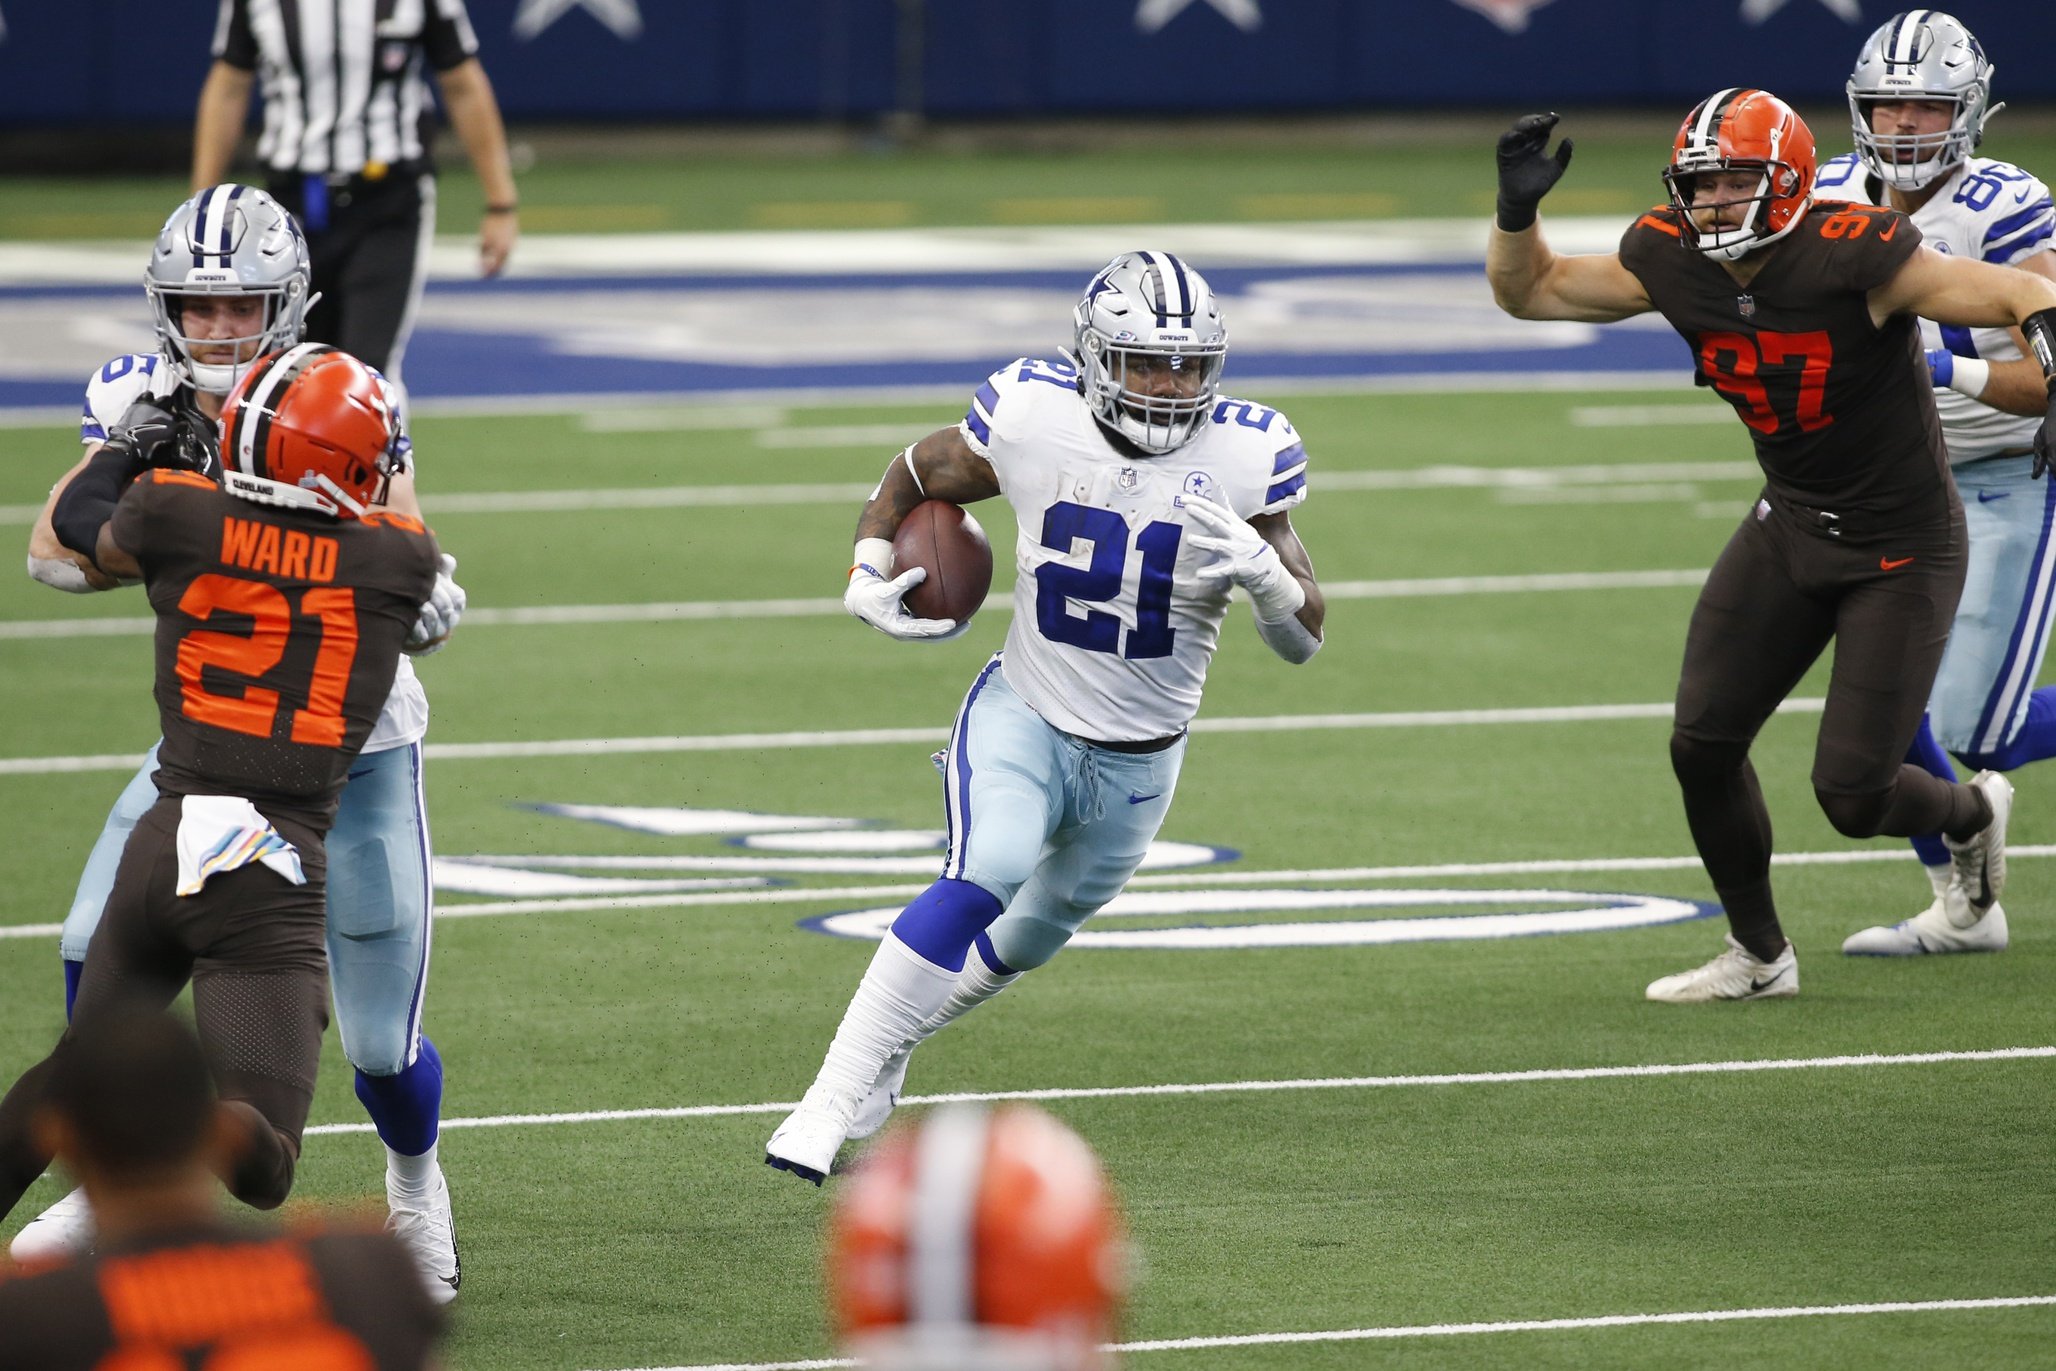 Dallas Cowboys running back Ezekiel Elliott (21) runs the ball in the second quarter against the Cleveland Browns at AT&T Stadium.